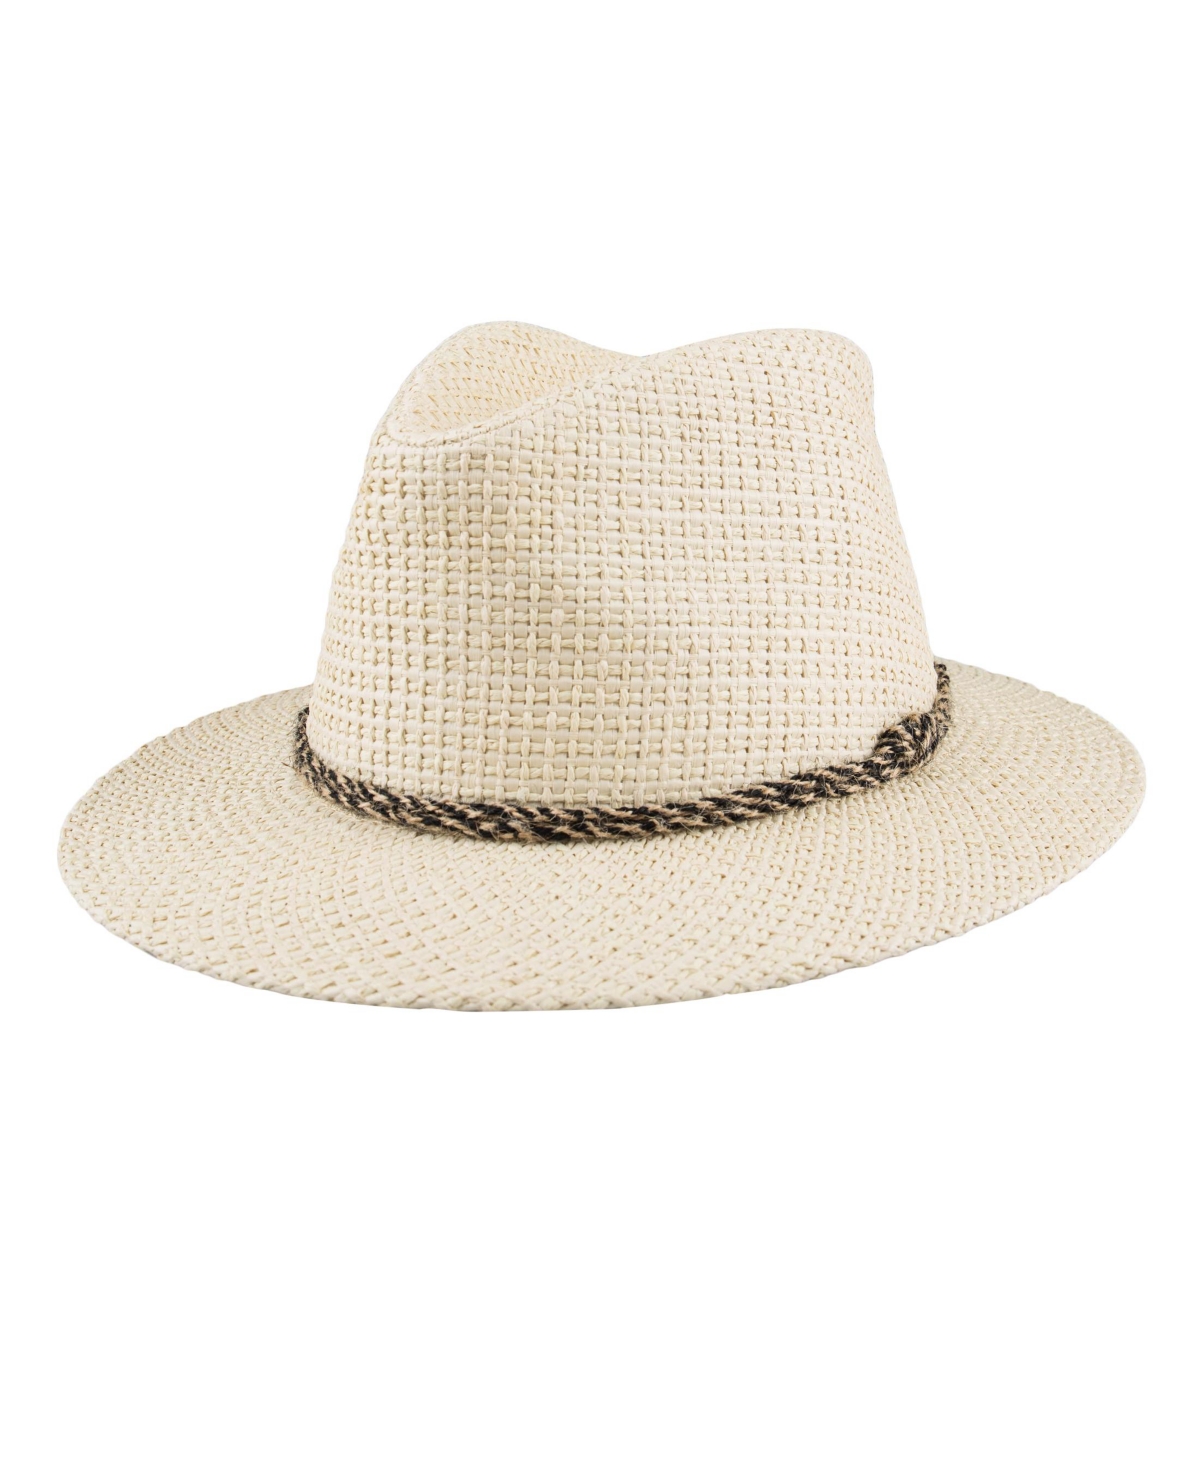 Men's Classic Panama Hat with Twisted Band - Natural